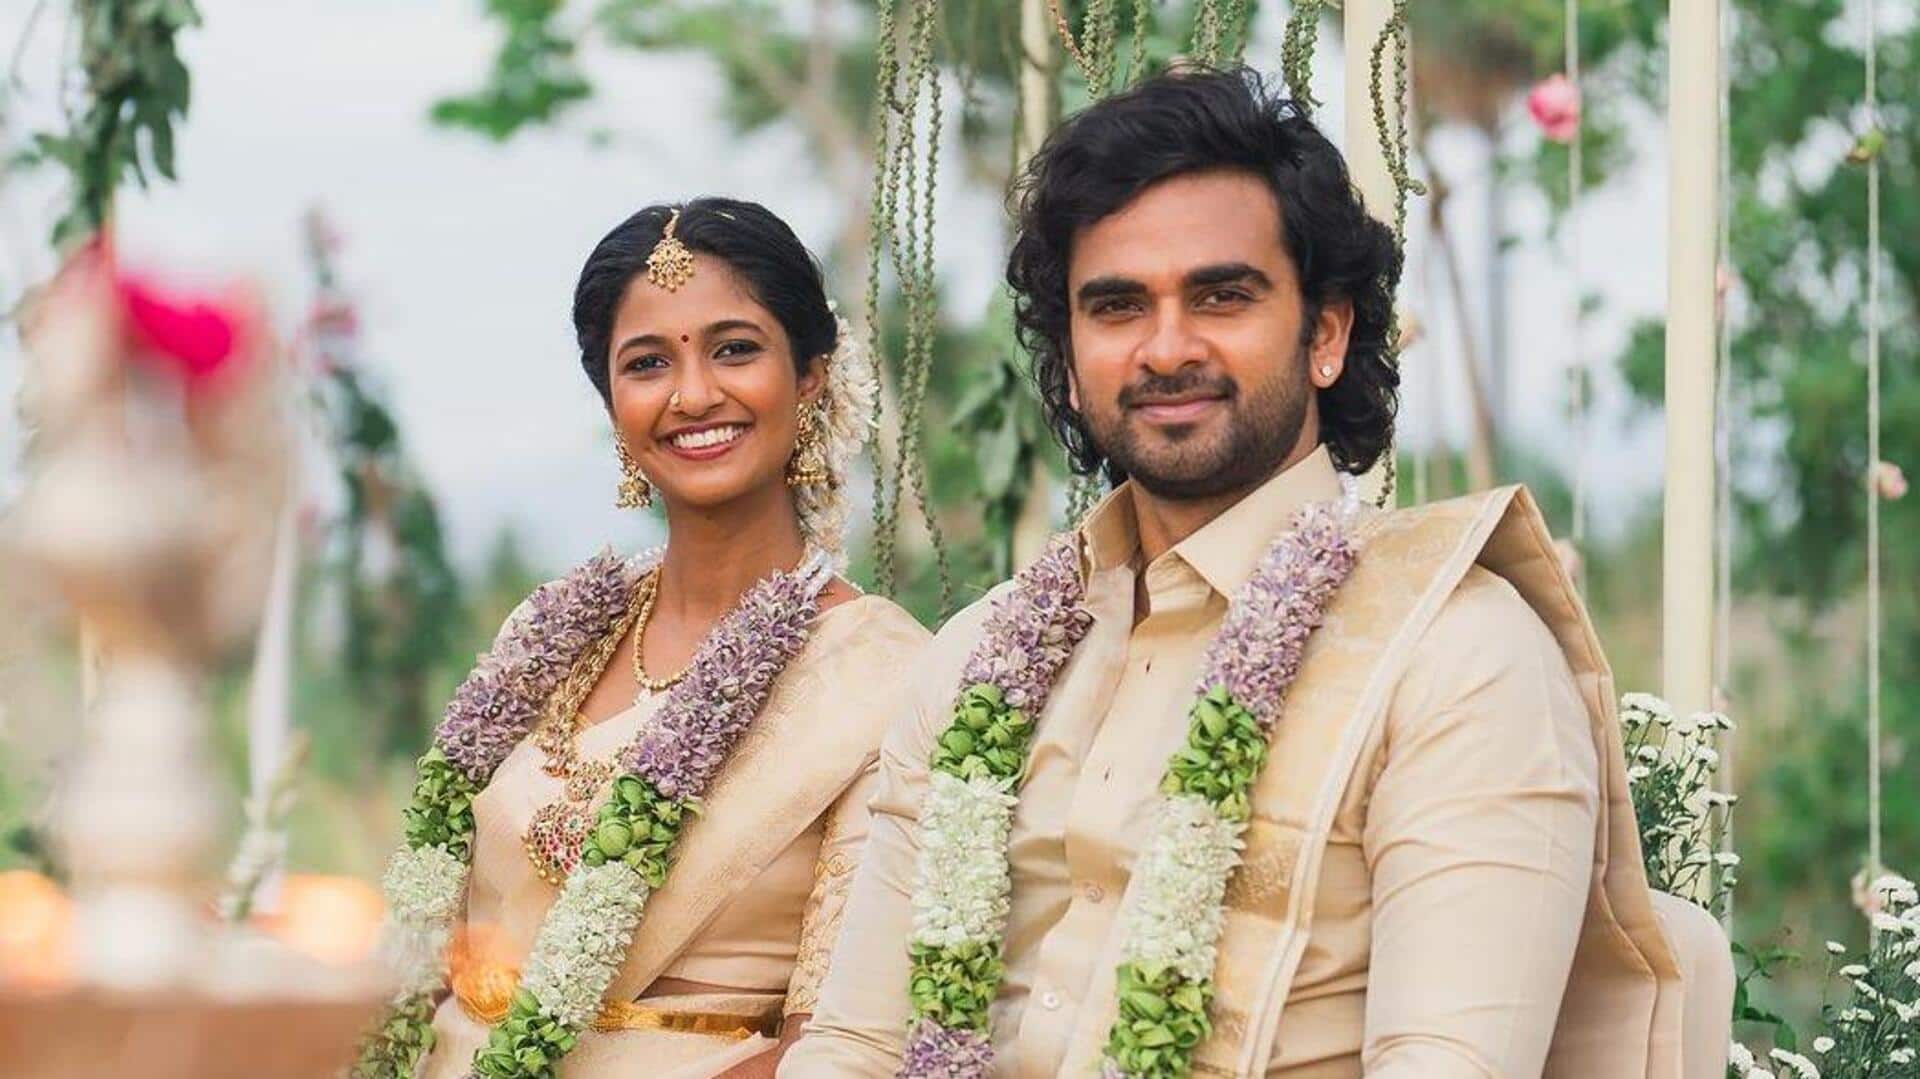 Official! Ashok Selvan-Keerthi Pandian are married; wedding photos are out